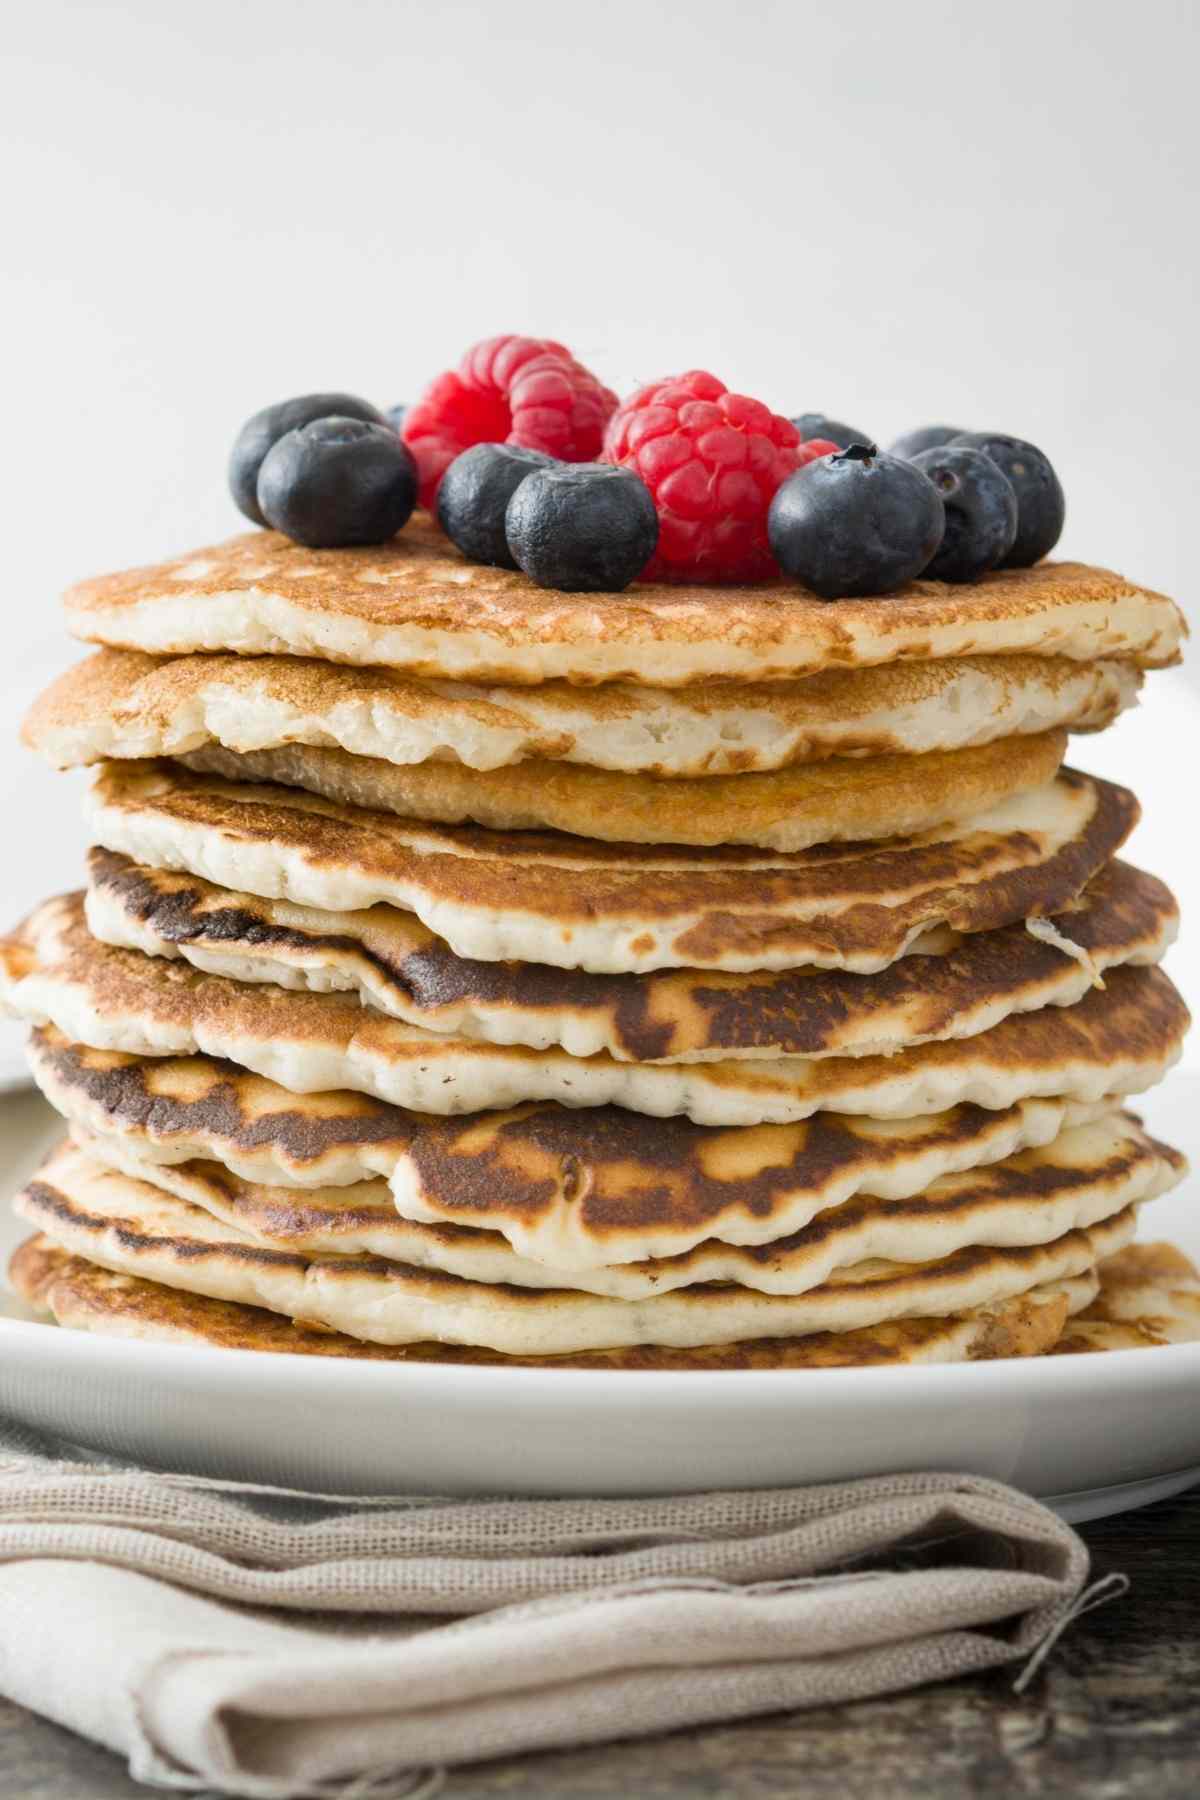 These Oatmeal Pancakes are light, fluffy, and have a touch of texture from the oats. They’re flavored with maple syrup, vanilla, and cinnamon and have a slightly tangy flavor.